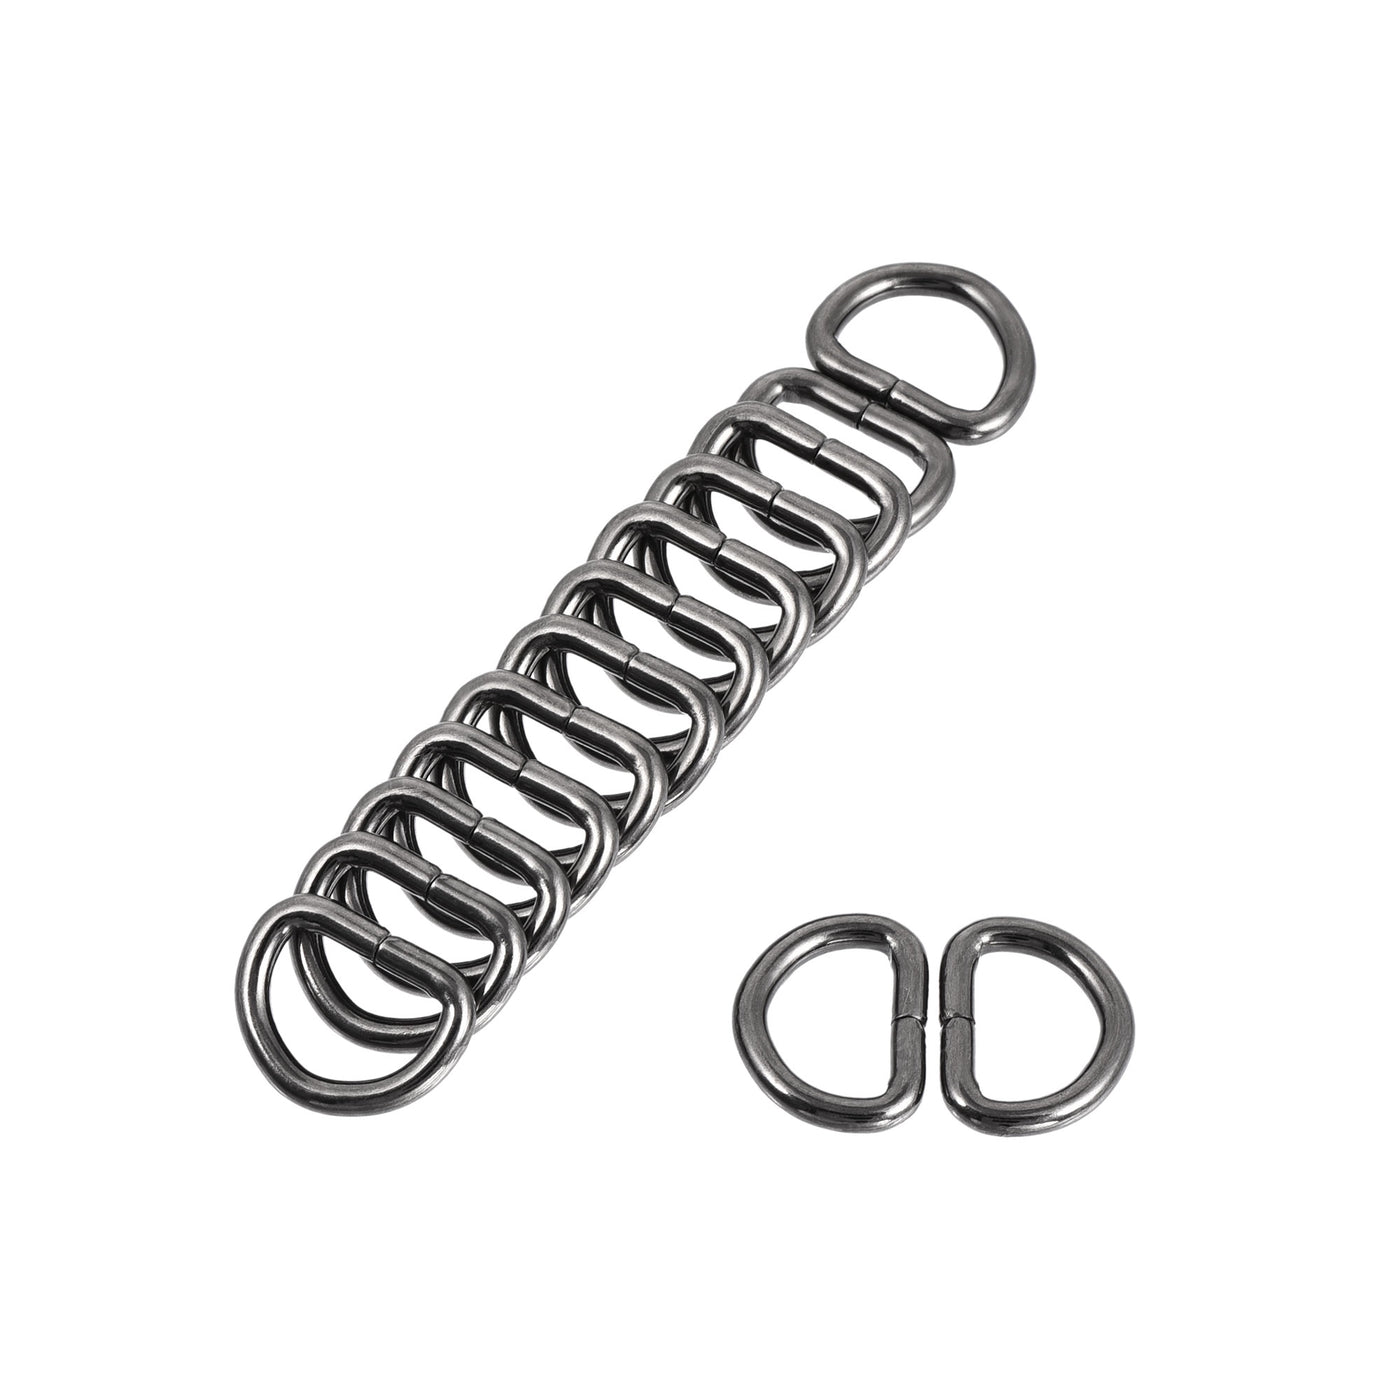 uxcell Uxcell Metal D Ring 0.51"(13mm) D-Rings Buckle for Hardware Bags Belts Craft DIY Accessories Black 50pcs